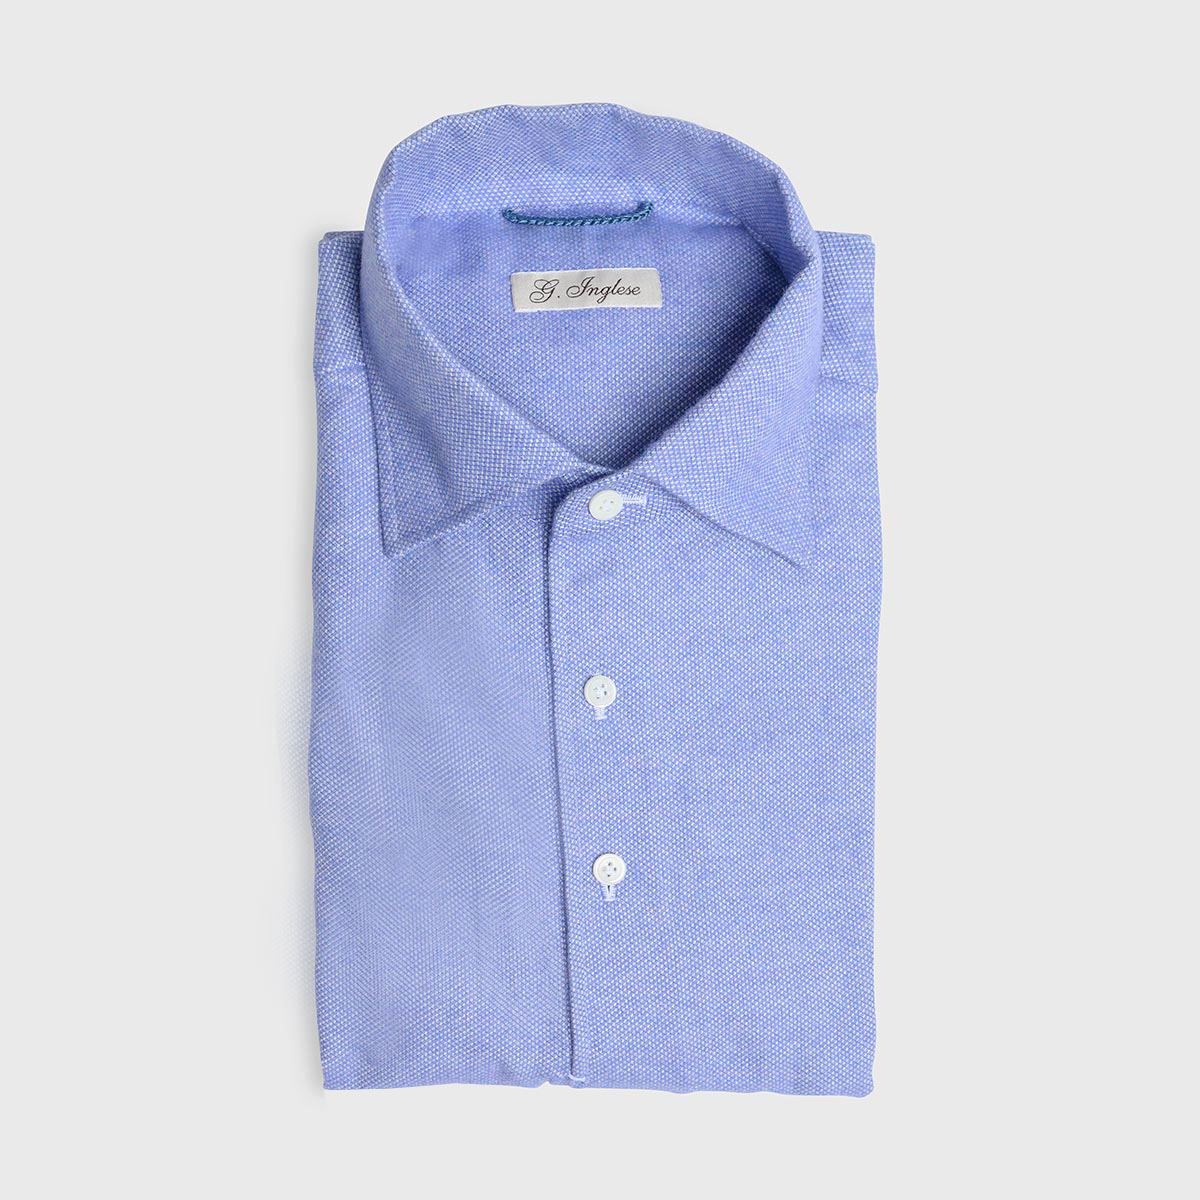 Mastroianni Lilac Cotton Flannel Polo Shirt G. Inglese on sale 2022